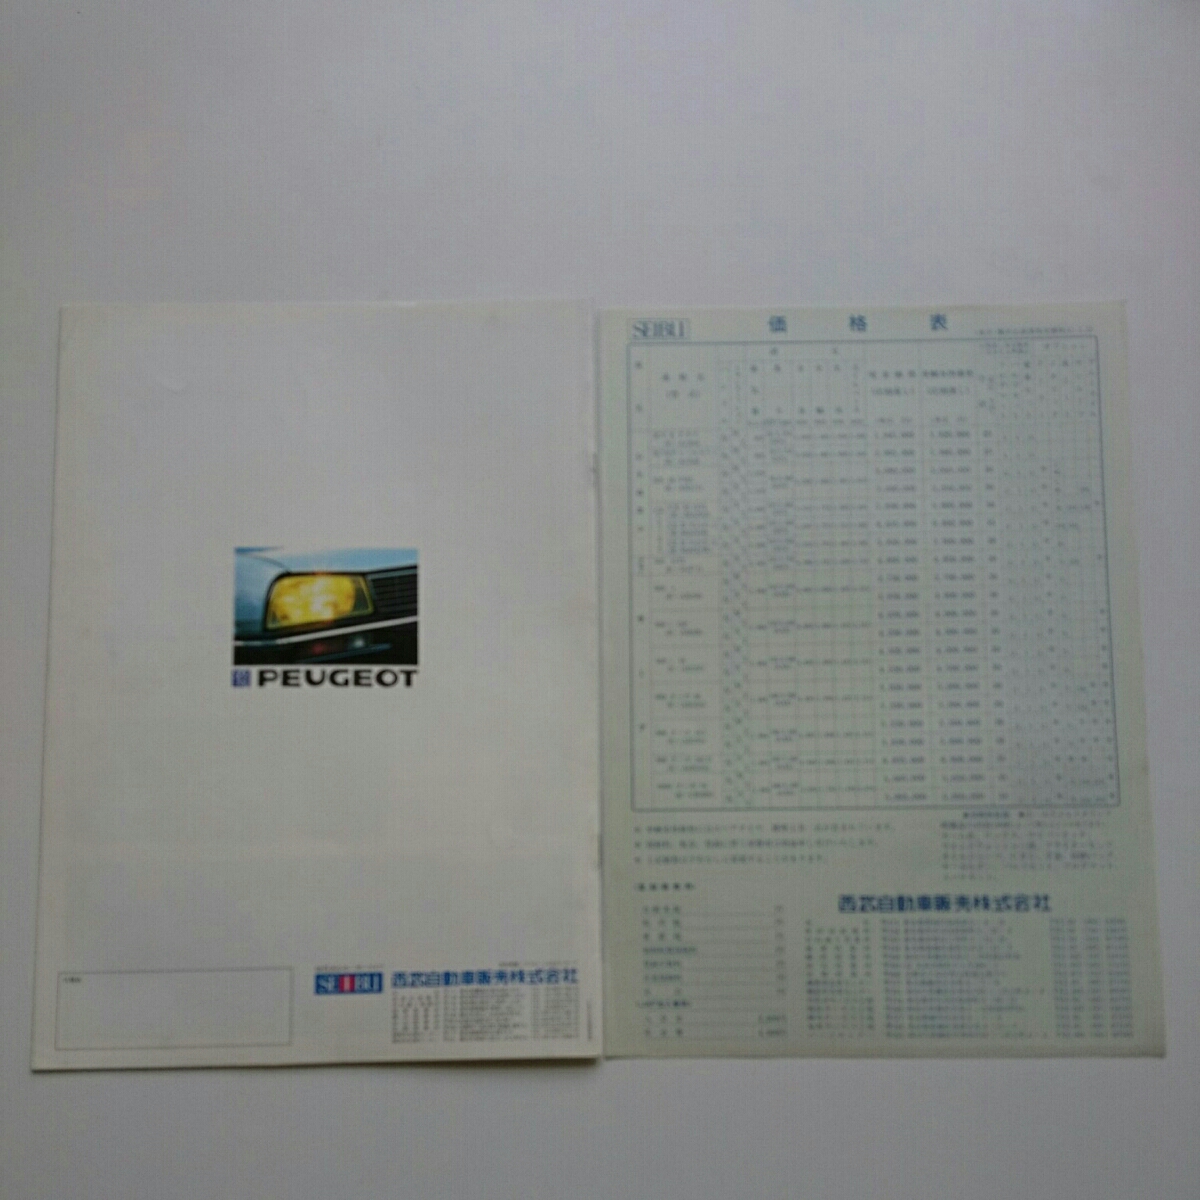  Peugeot 505GTI Showa era 61 year 4 month issue 1986 year Seibu automobile ( regular dealer ) issue catalog + price table not yet read goods rare out of print car 